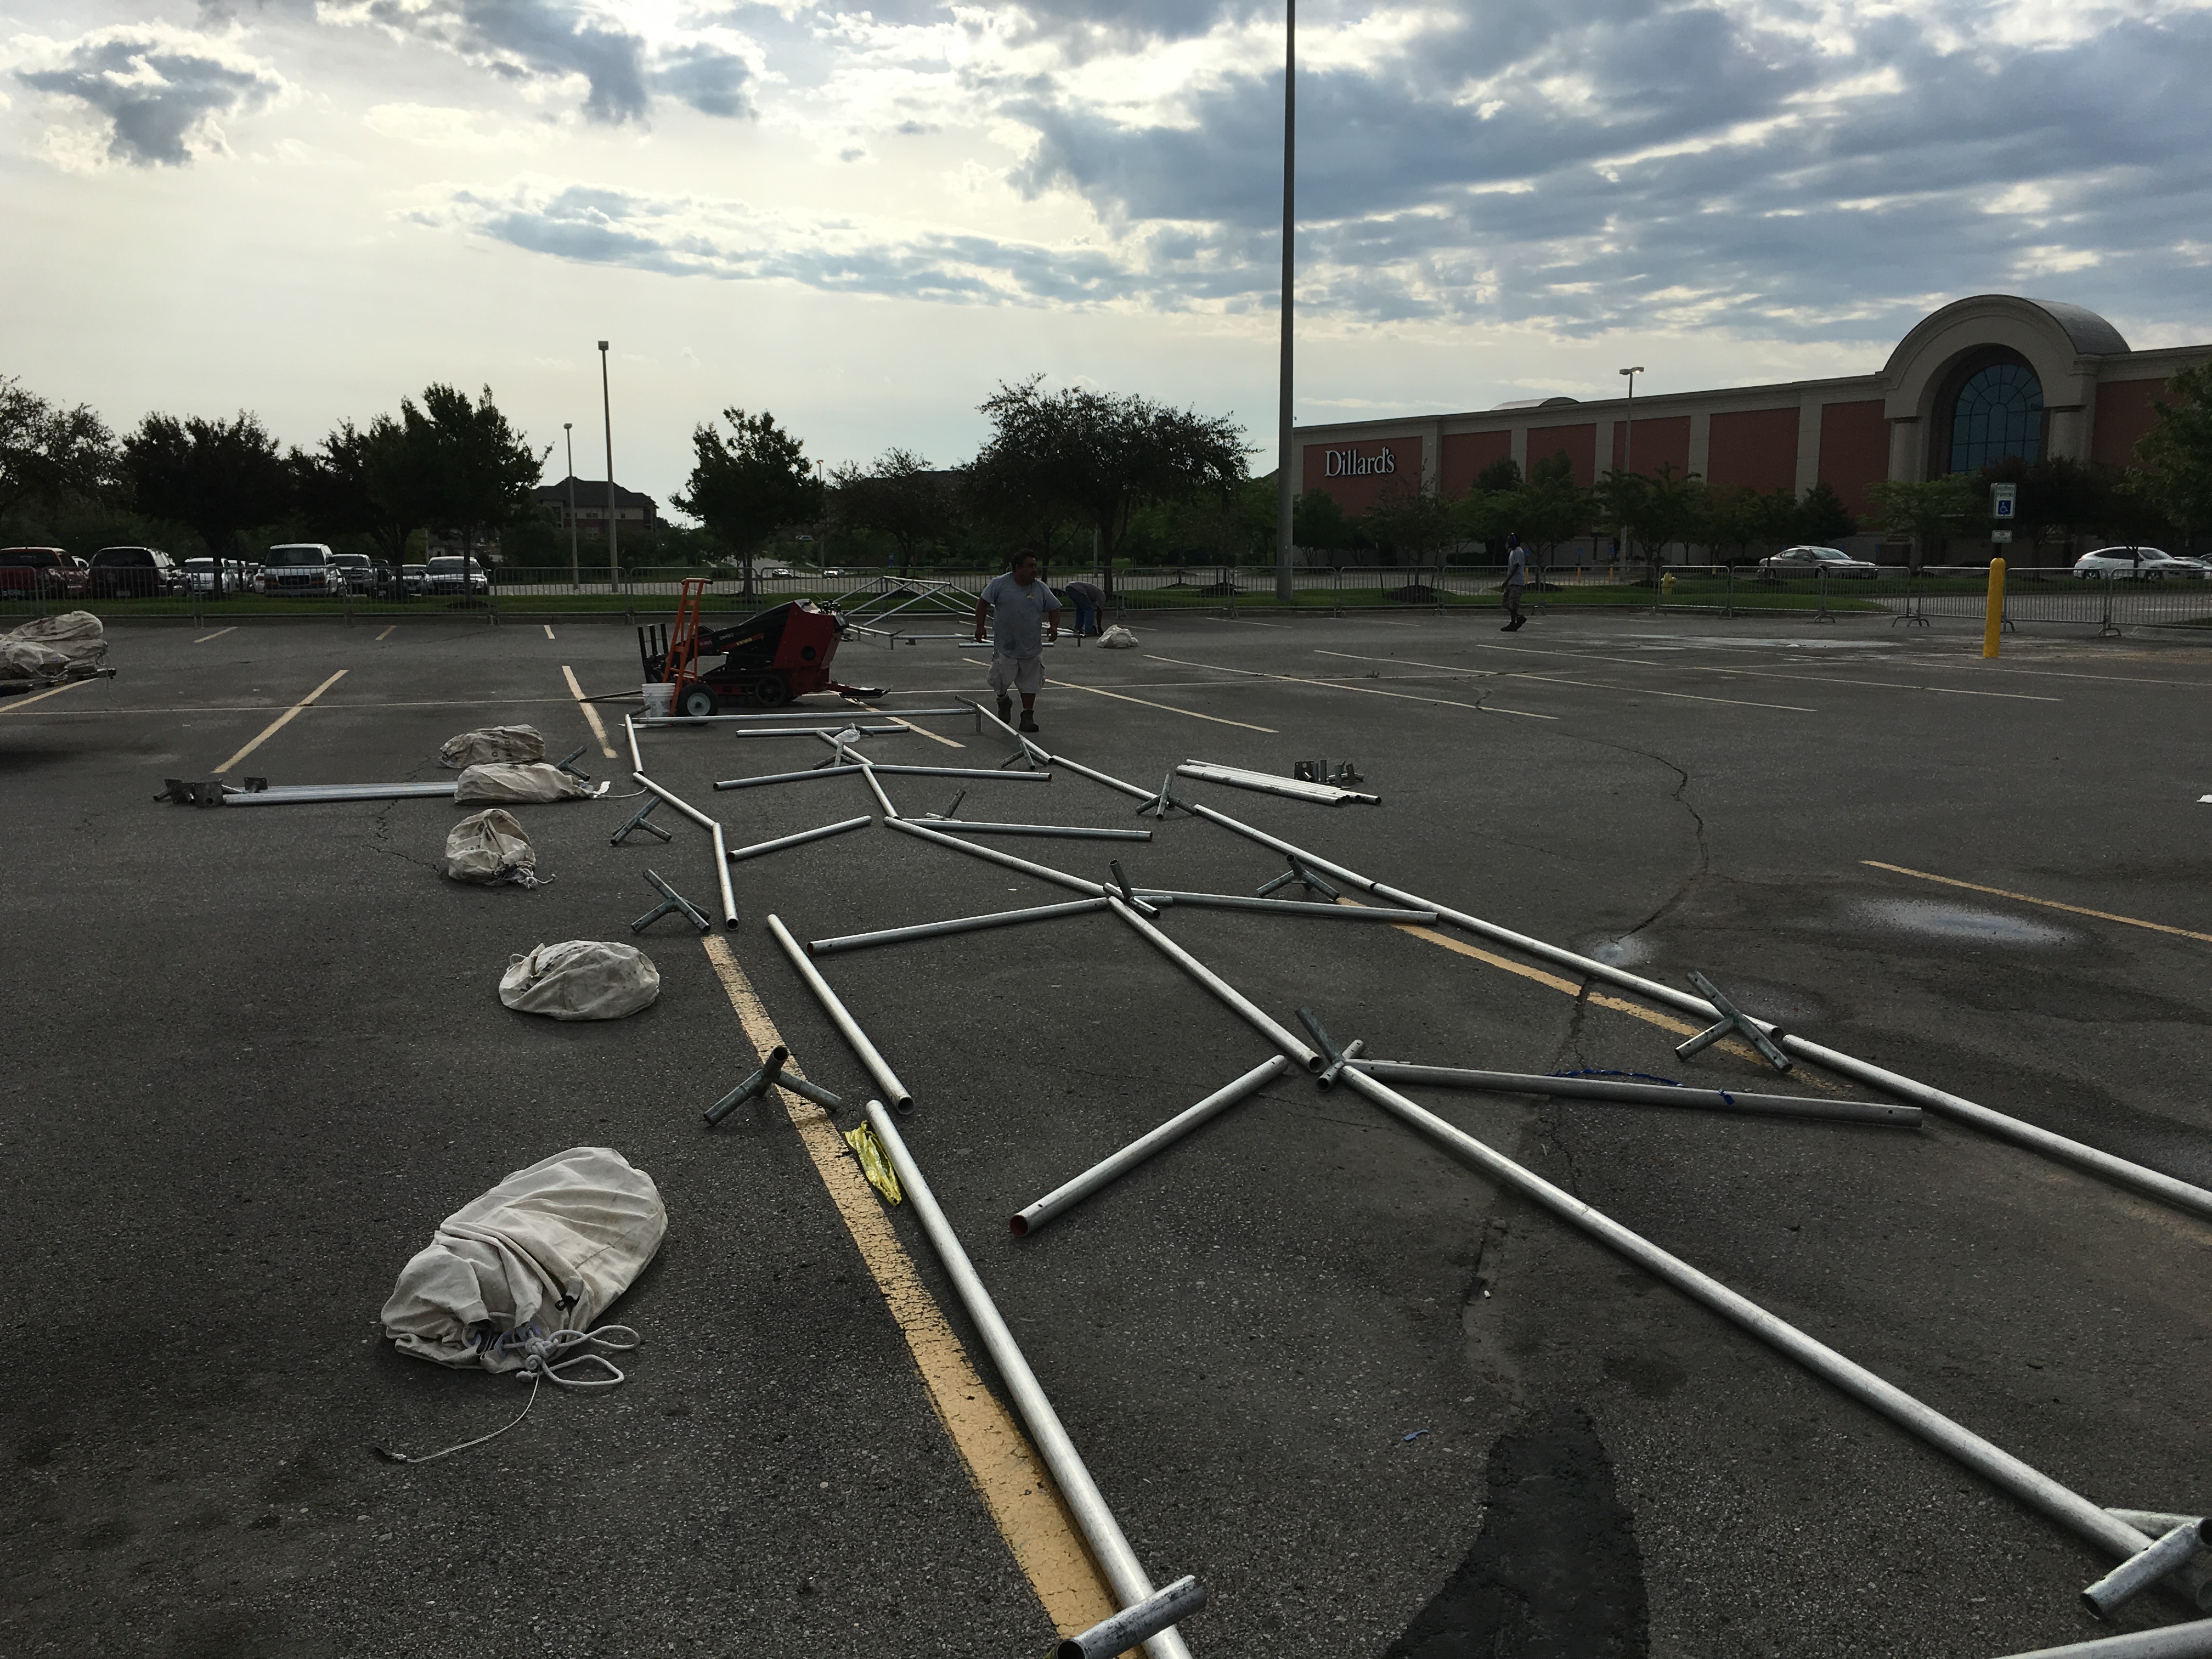 Laying out frame tents at Scheels in Des Moines, Iowa